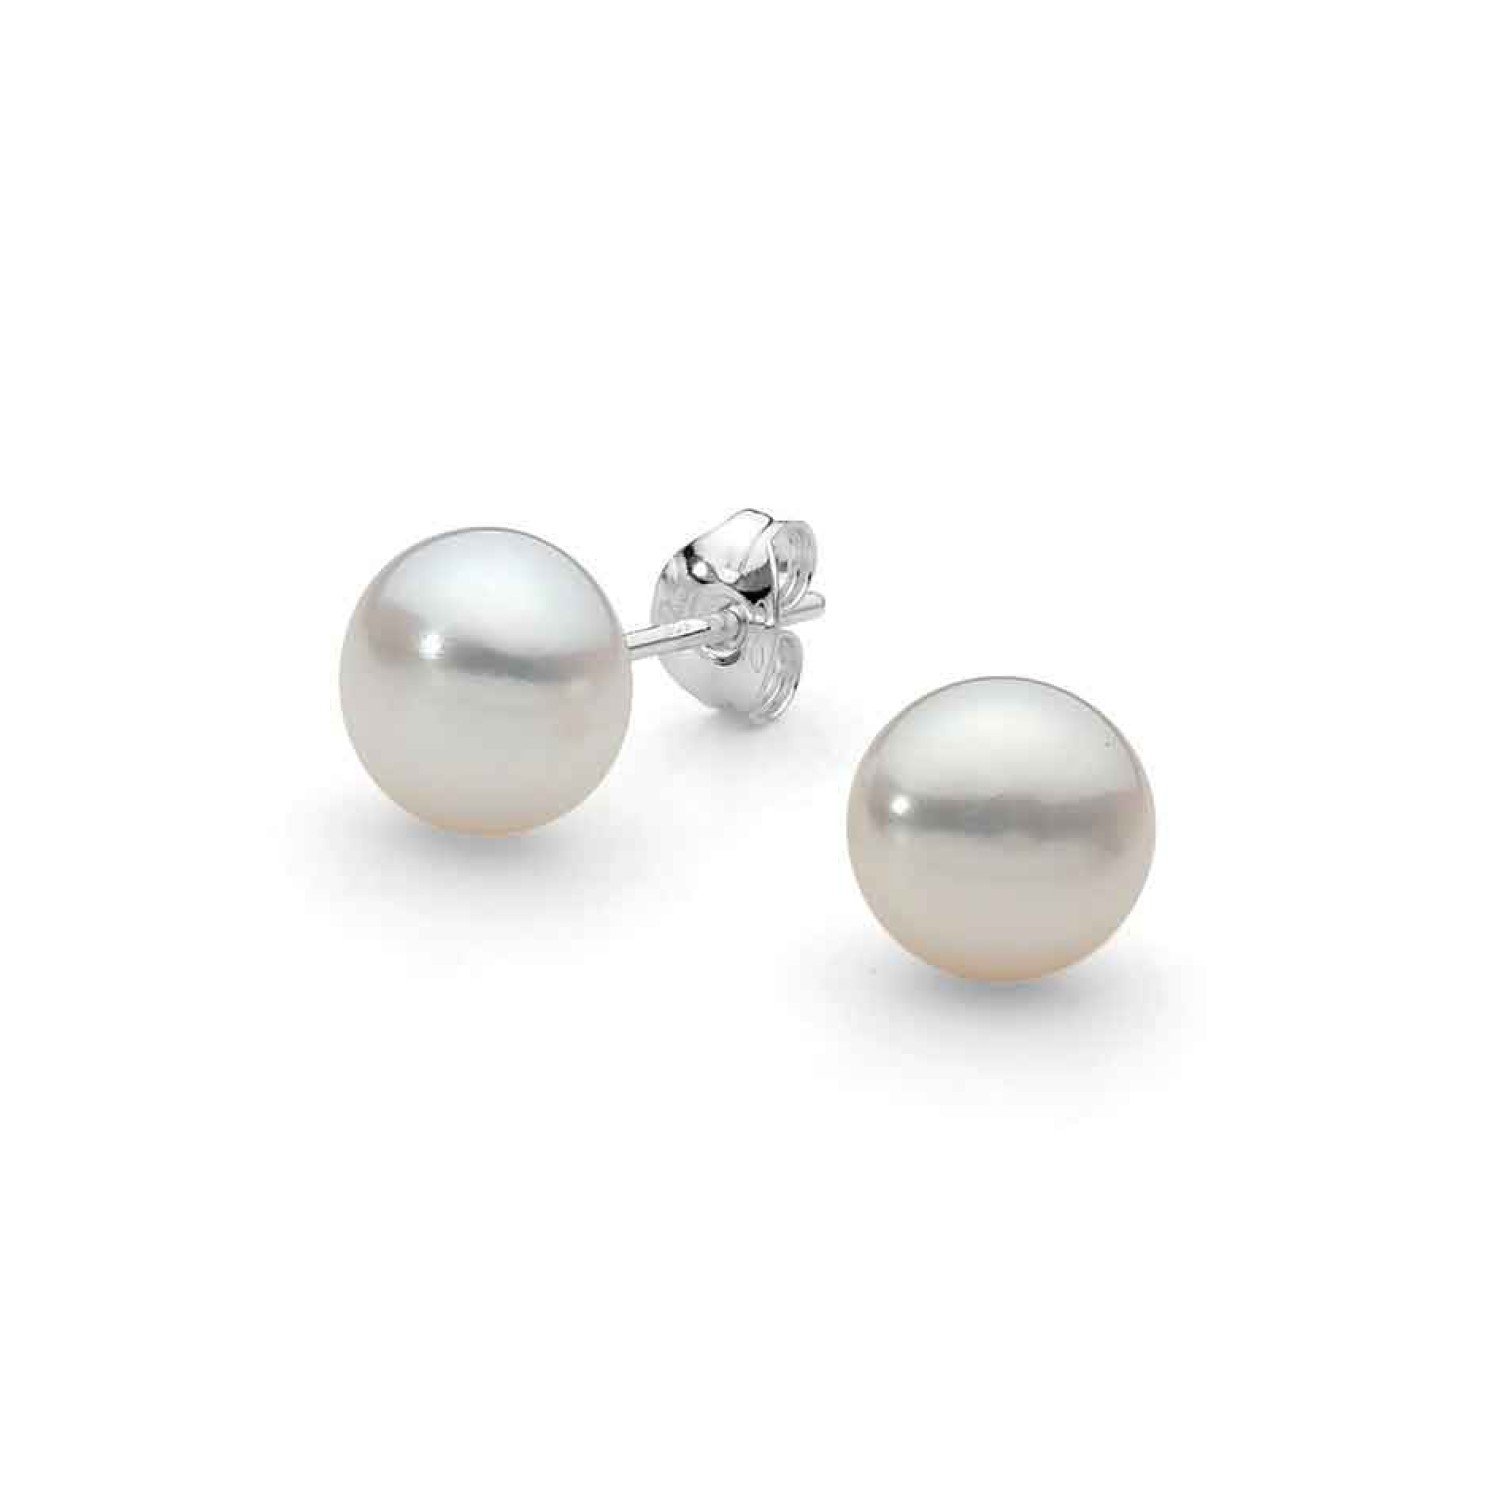 Freshwater Pearl Stud Earrings.  Available online or instore at Christies Palmerston NorthCrafted in Sterling Silver  8mm  Freshwater Pearls 5 Year Christies Guarantee 3 Months No Payments and Interest for Q Card holders Online Lay-Buy a @christies.online